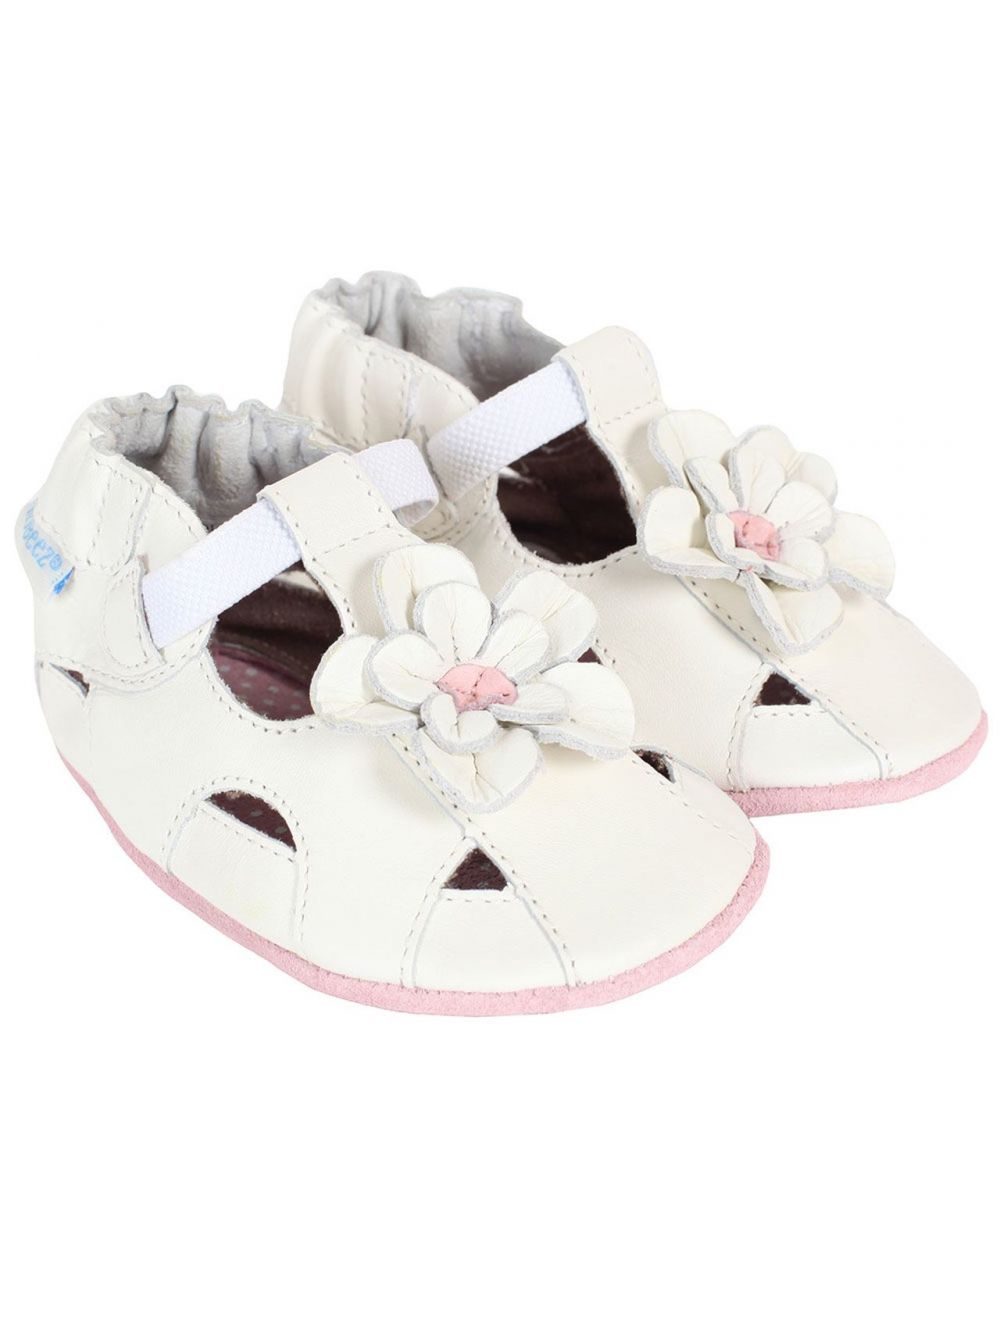 Robeez Soft Soles toddlers 18-24 months Pretty pansy pink